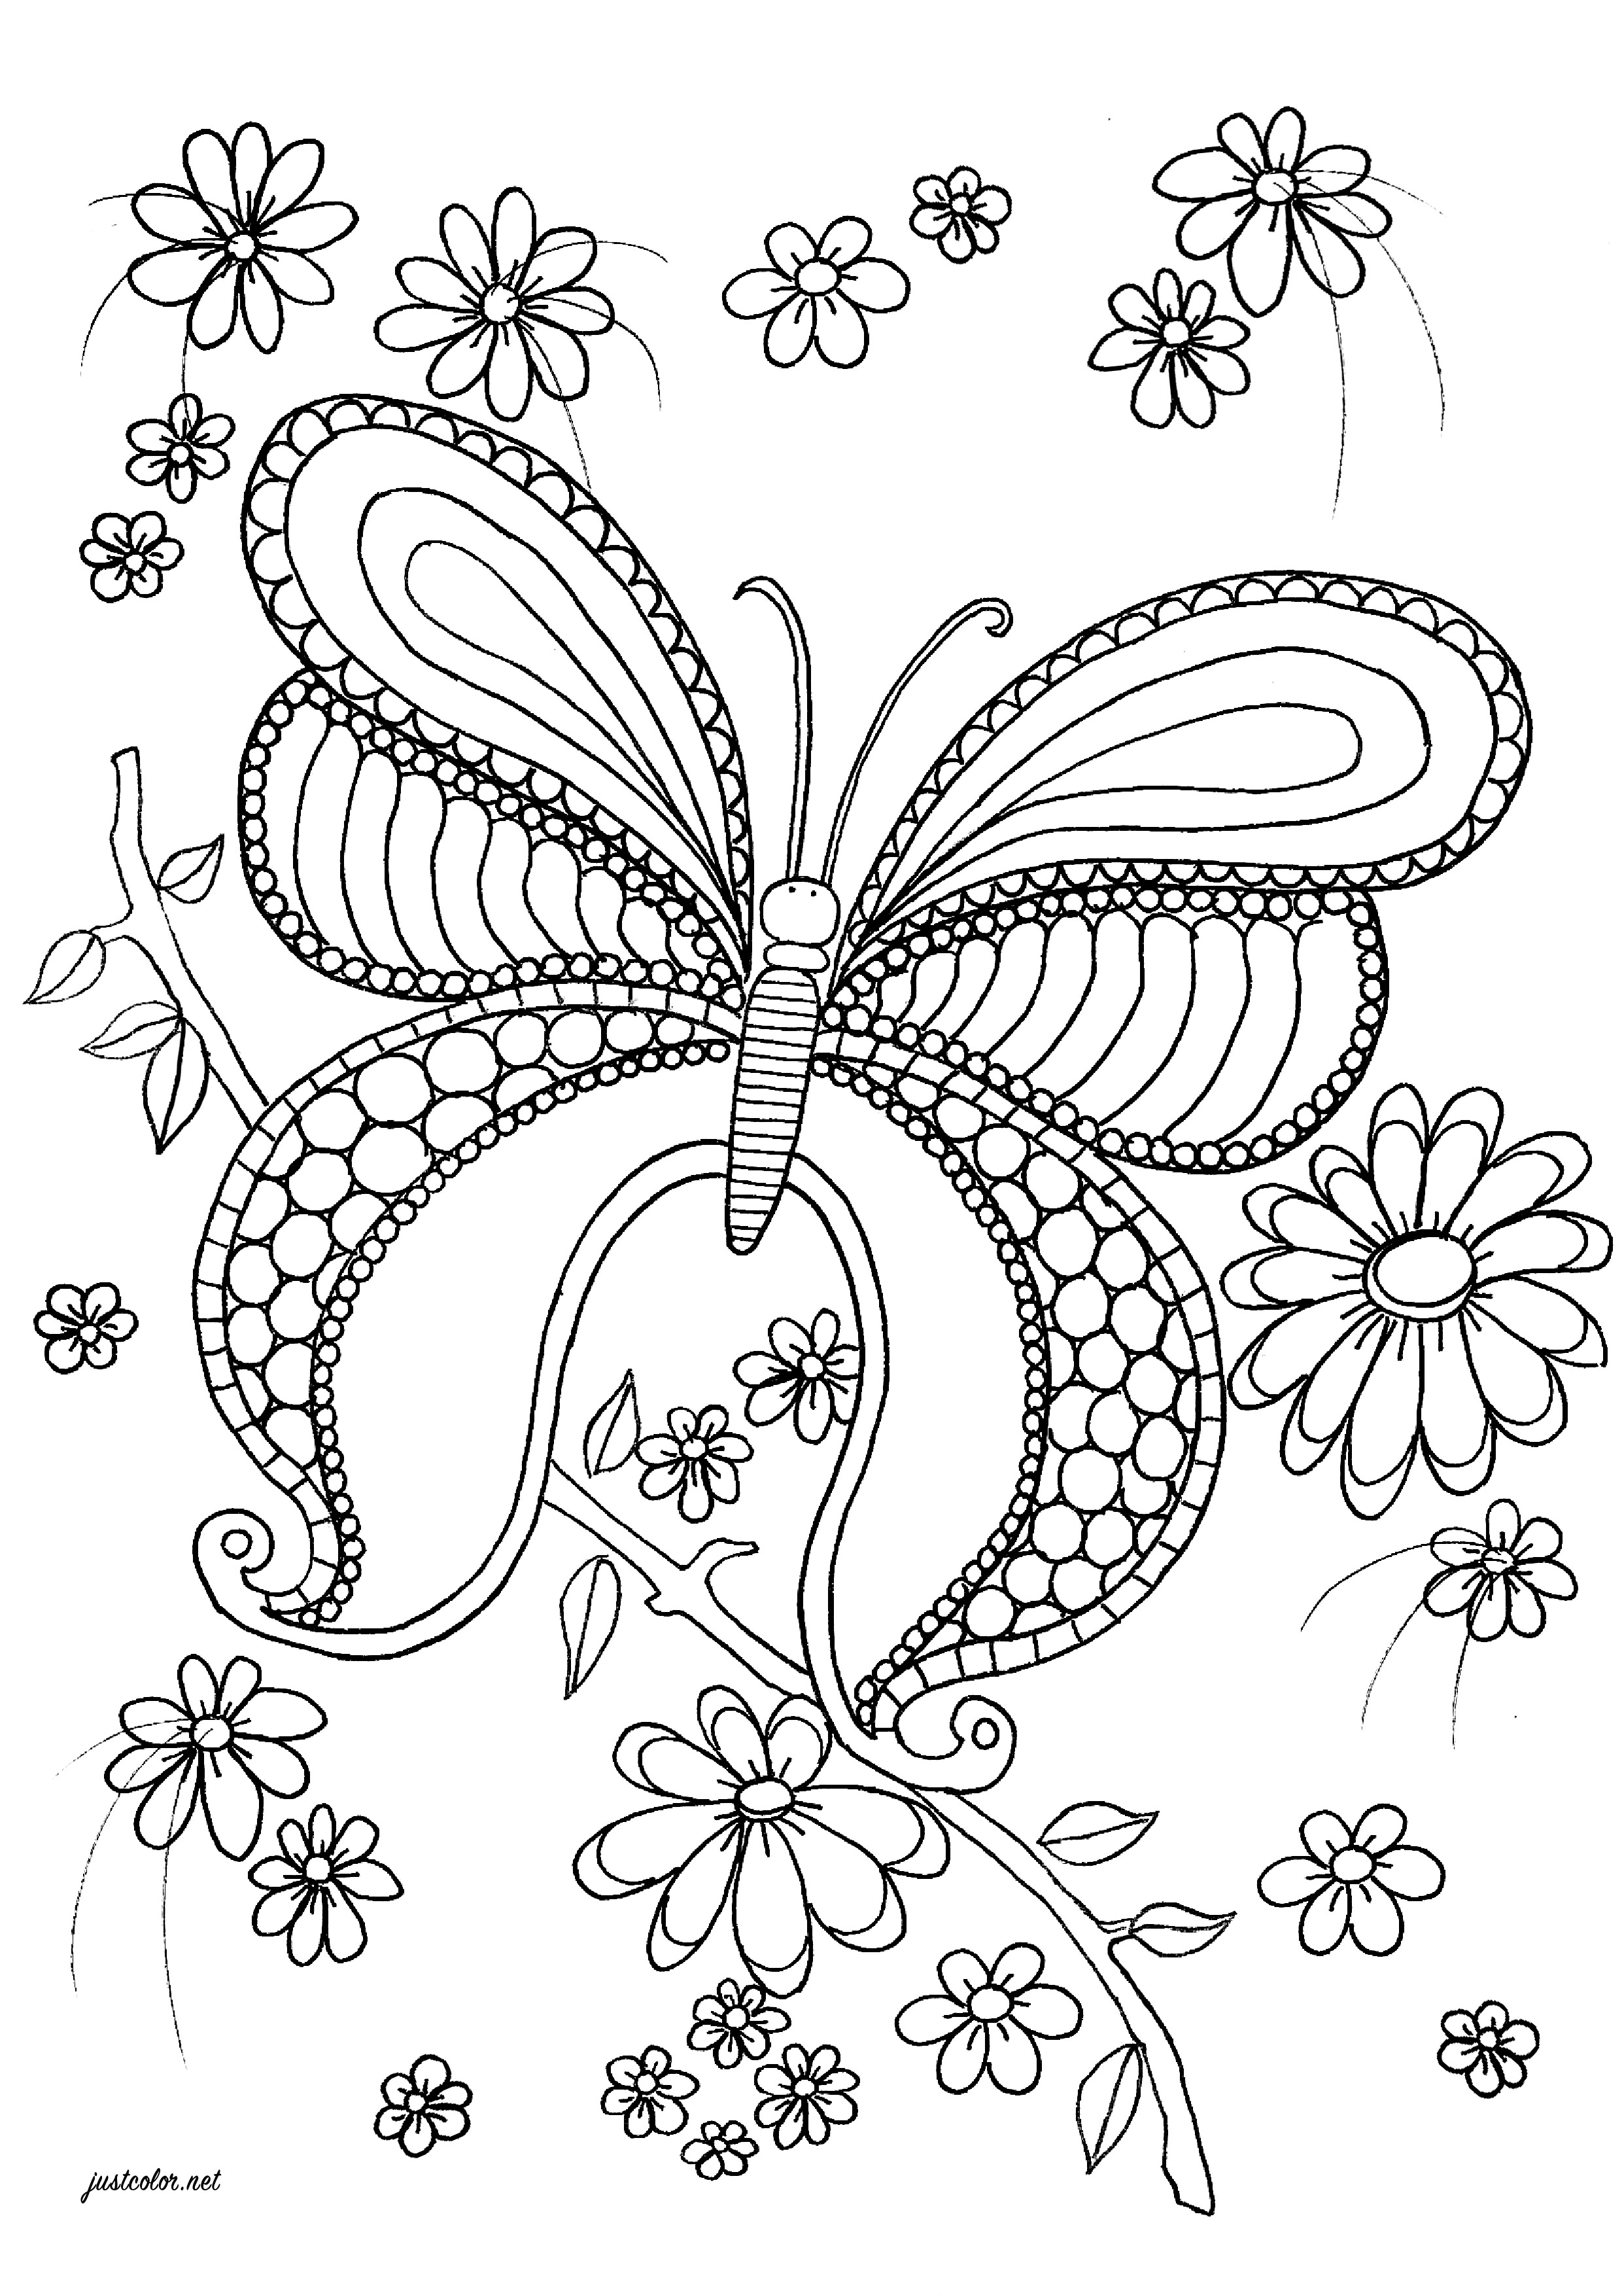 Cute butterfly with beautiful patterns to color, and elegant flowers around